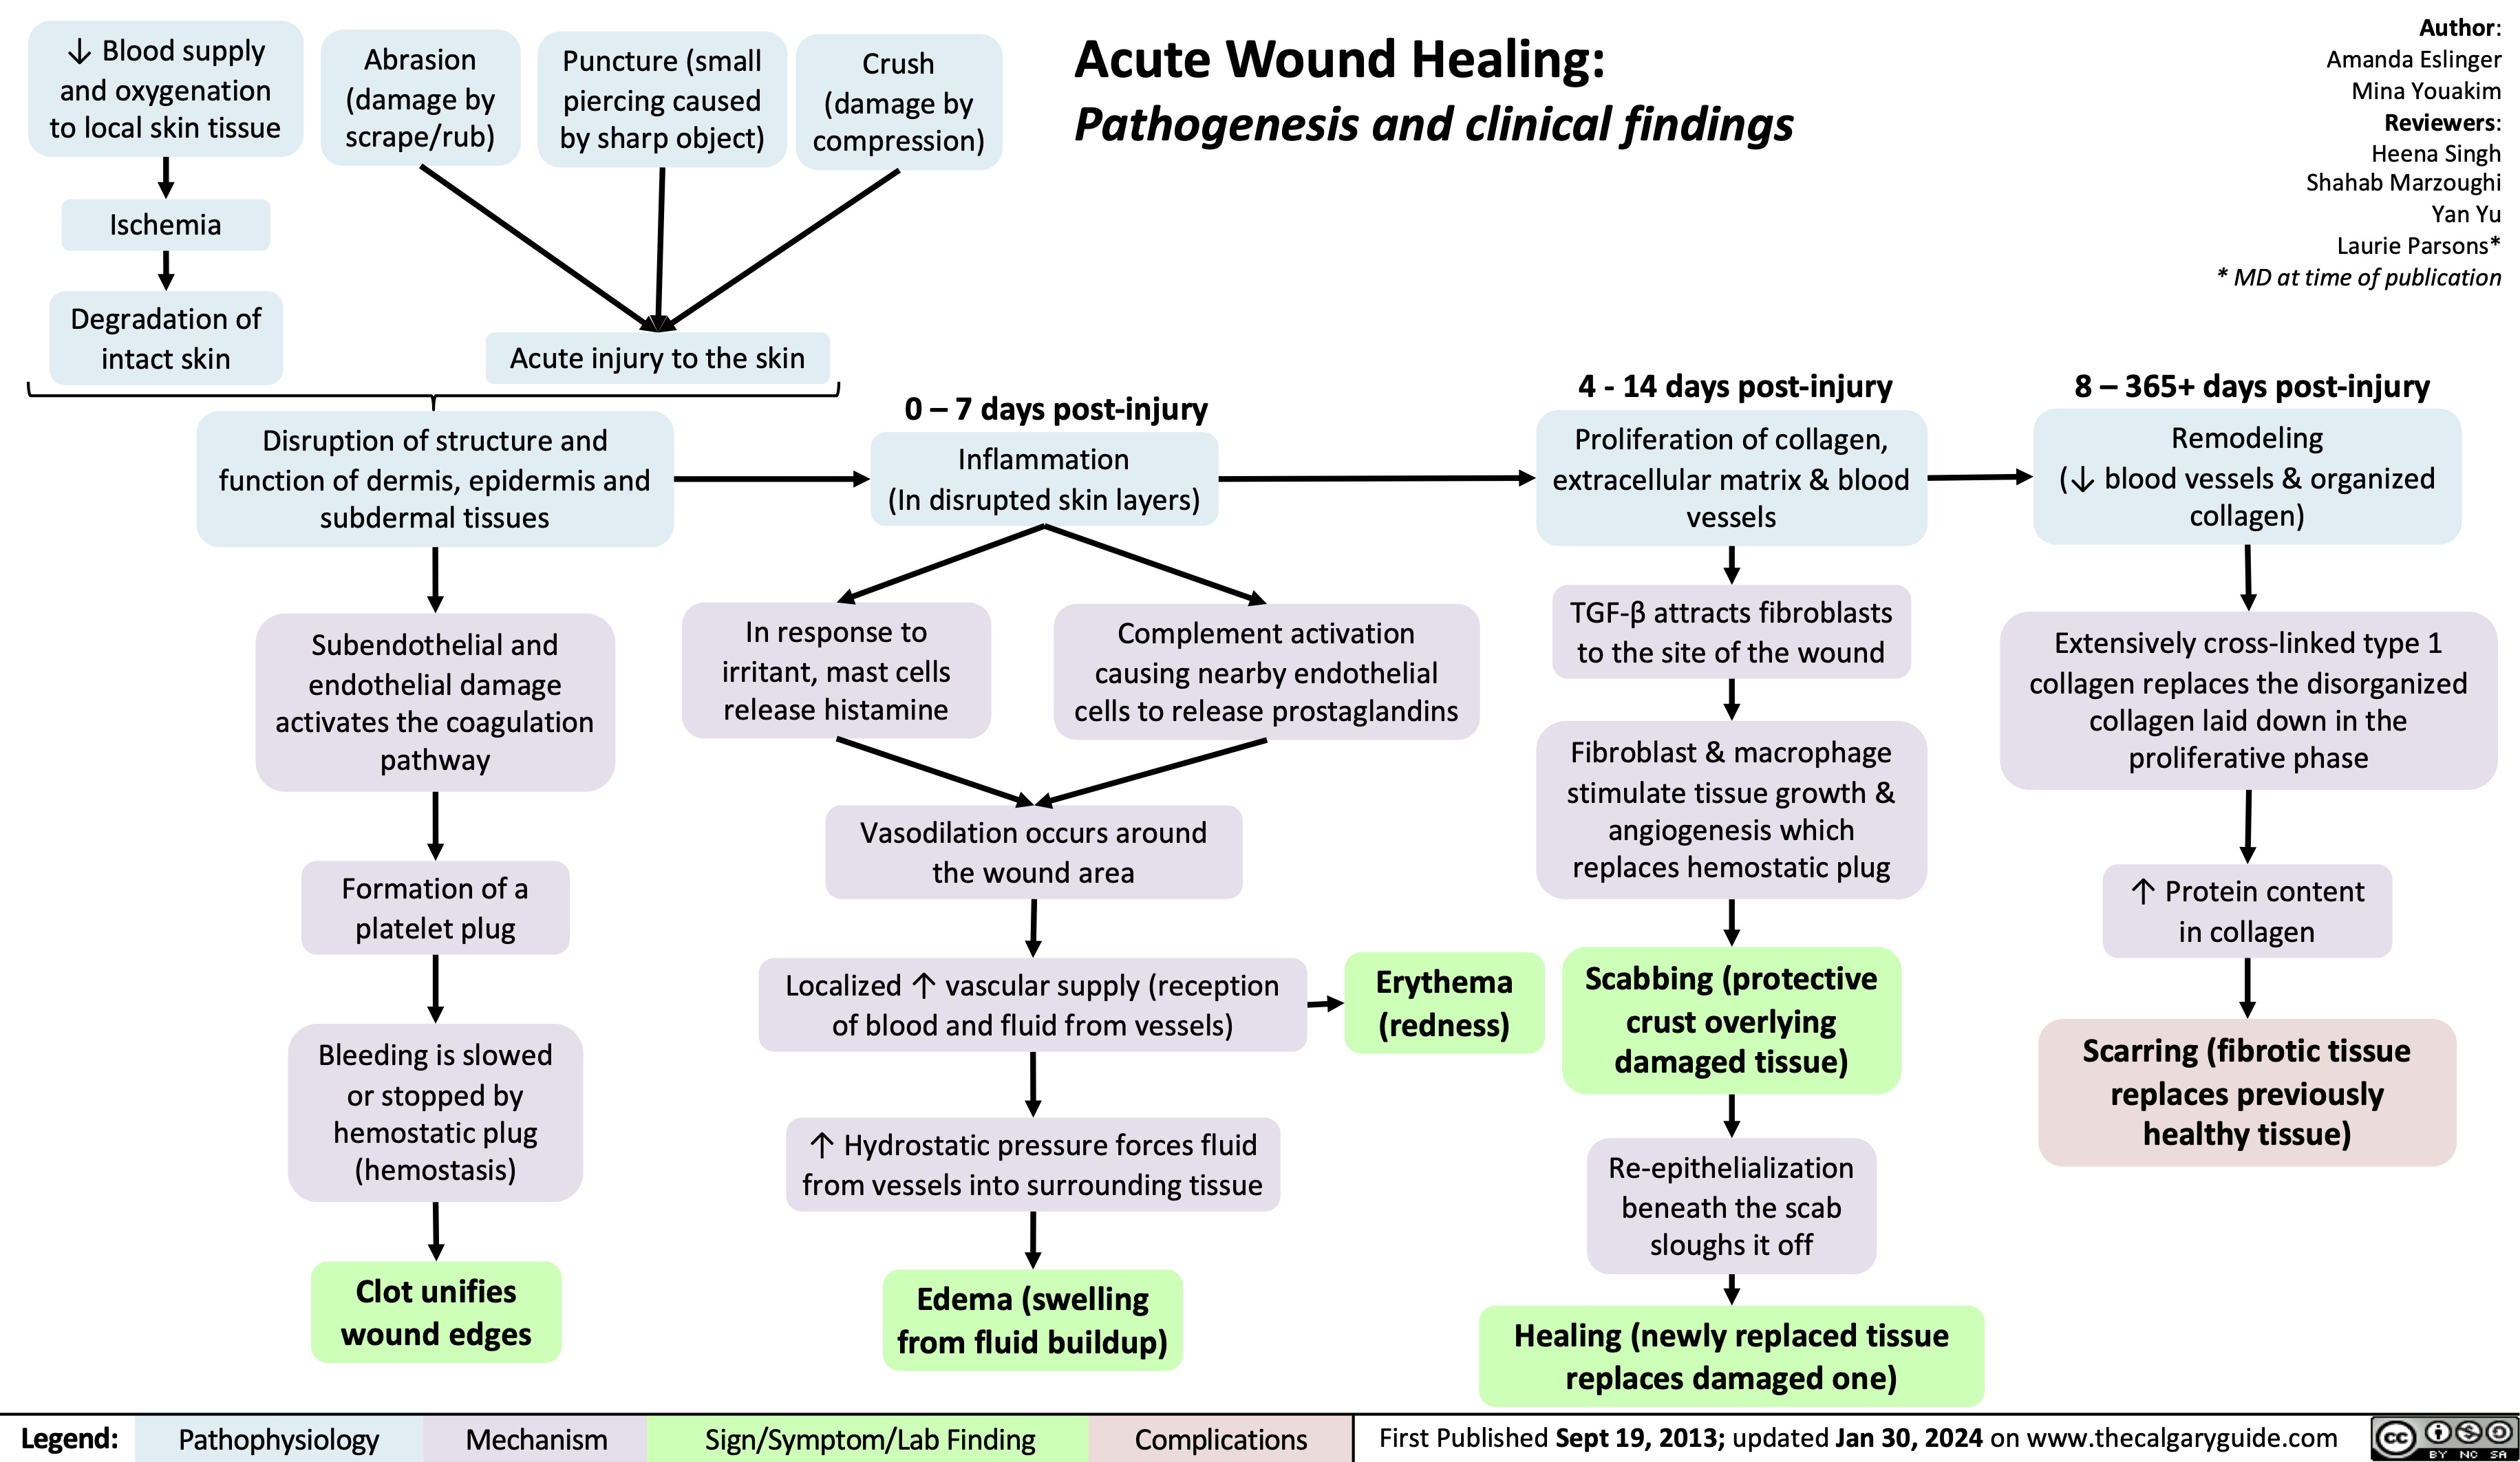   ↓ Blood supply and oxygenation to local skin tissue
Ischemia
Degradation of intact skin
Abrasion (damage by scrape/rub)
Puncture (small piercing caused by sharp object)
Acute injury to the skin
Crush (damage by compression)
Acute Wound Healing:
Pathogenesis and clinical findings
Author: Amanda Eslinger Mina Youakim Reviewers: Heena Singh Shahab Marzoughi Yan Yu Laurie Parsons* * MD at time of publication
8 – 365+ days post-injury
Remodeling
(↓ blood vessels & organized collagen)
Extensively cross-linked type 1 collagen replaces the disorganized
collagen laid down in the proliferative phase
↑ Protein content in collagen
Scarring (fibrotic tissue replaces previously healthy tissue)
            Disruption of structure and function of dermis, epidermis and subdermal tissues
Subendothelial and endothelial damage activates the coagulation pathway
Formation of a platelet plug
Bleeding is slowed or stopped by
hemostatic plug (hemostasis)
Clot unifies wound edges
0 – 7 days post-injury
Inflammation
(In disrupted skin layers)
4 - 14 days post-injury
Proliferation of collagen, extracellular matrix & blood vessels
TGF-β attracts fibroblasts to the site of the wound
Fibroblast & macrophage stimulate tissue growth &
angiogenesis which replaces hemostatic plug
Scabbing (protective crust overlying damaged tissue)
Re-epithelialization beneath the scab sloughs it off
Healing (newly replaced tissue replaces damaged one)
        In response to irritant, mast cells release histamine
Complement activation causing nearby endothelial cells to release prostaglandins
      Vasodilation occurs around the wound area
Localized ↑ vascular supply (reception of blood and fluid from vessels)
↑ Hydrostatic pressure forces fluid from vessels into surrounding tissue
Edema (swelling from fluid buildup)
Erythema (redness)
             Legend:
 Pathophysiology
Mechanism
Sign/Symptom/Lab Finding
 Complications
 First Published Sept 19, 2013; updated Jan 30, 2024 on www.thecalgaryguide.com
   